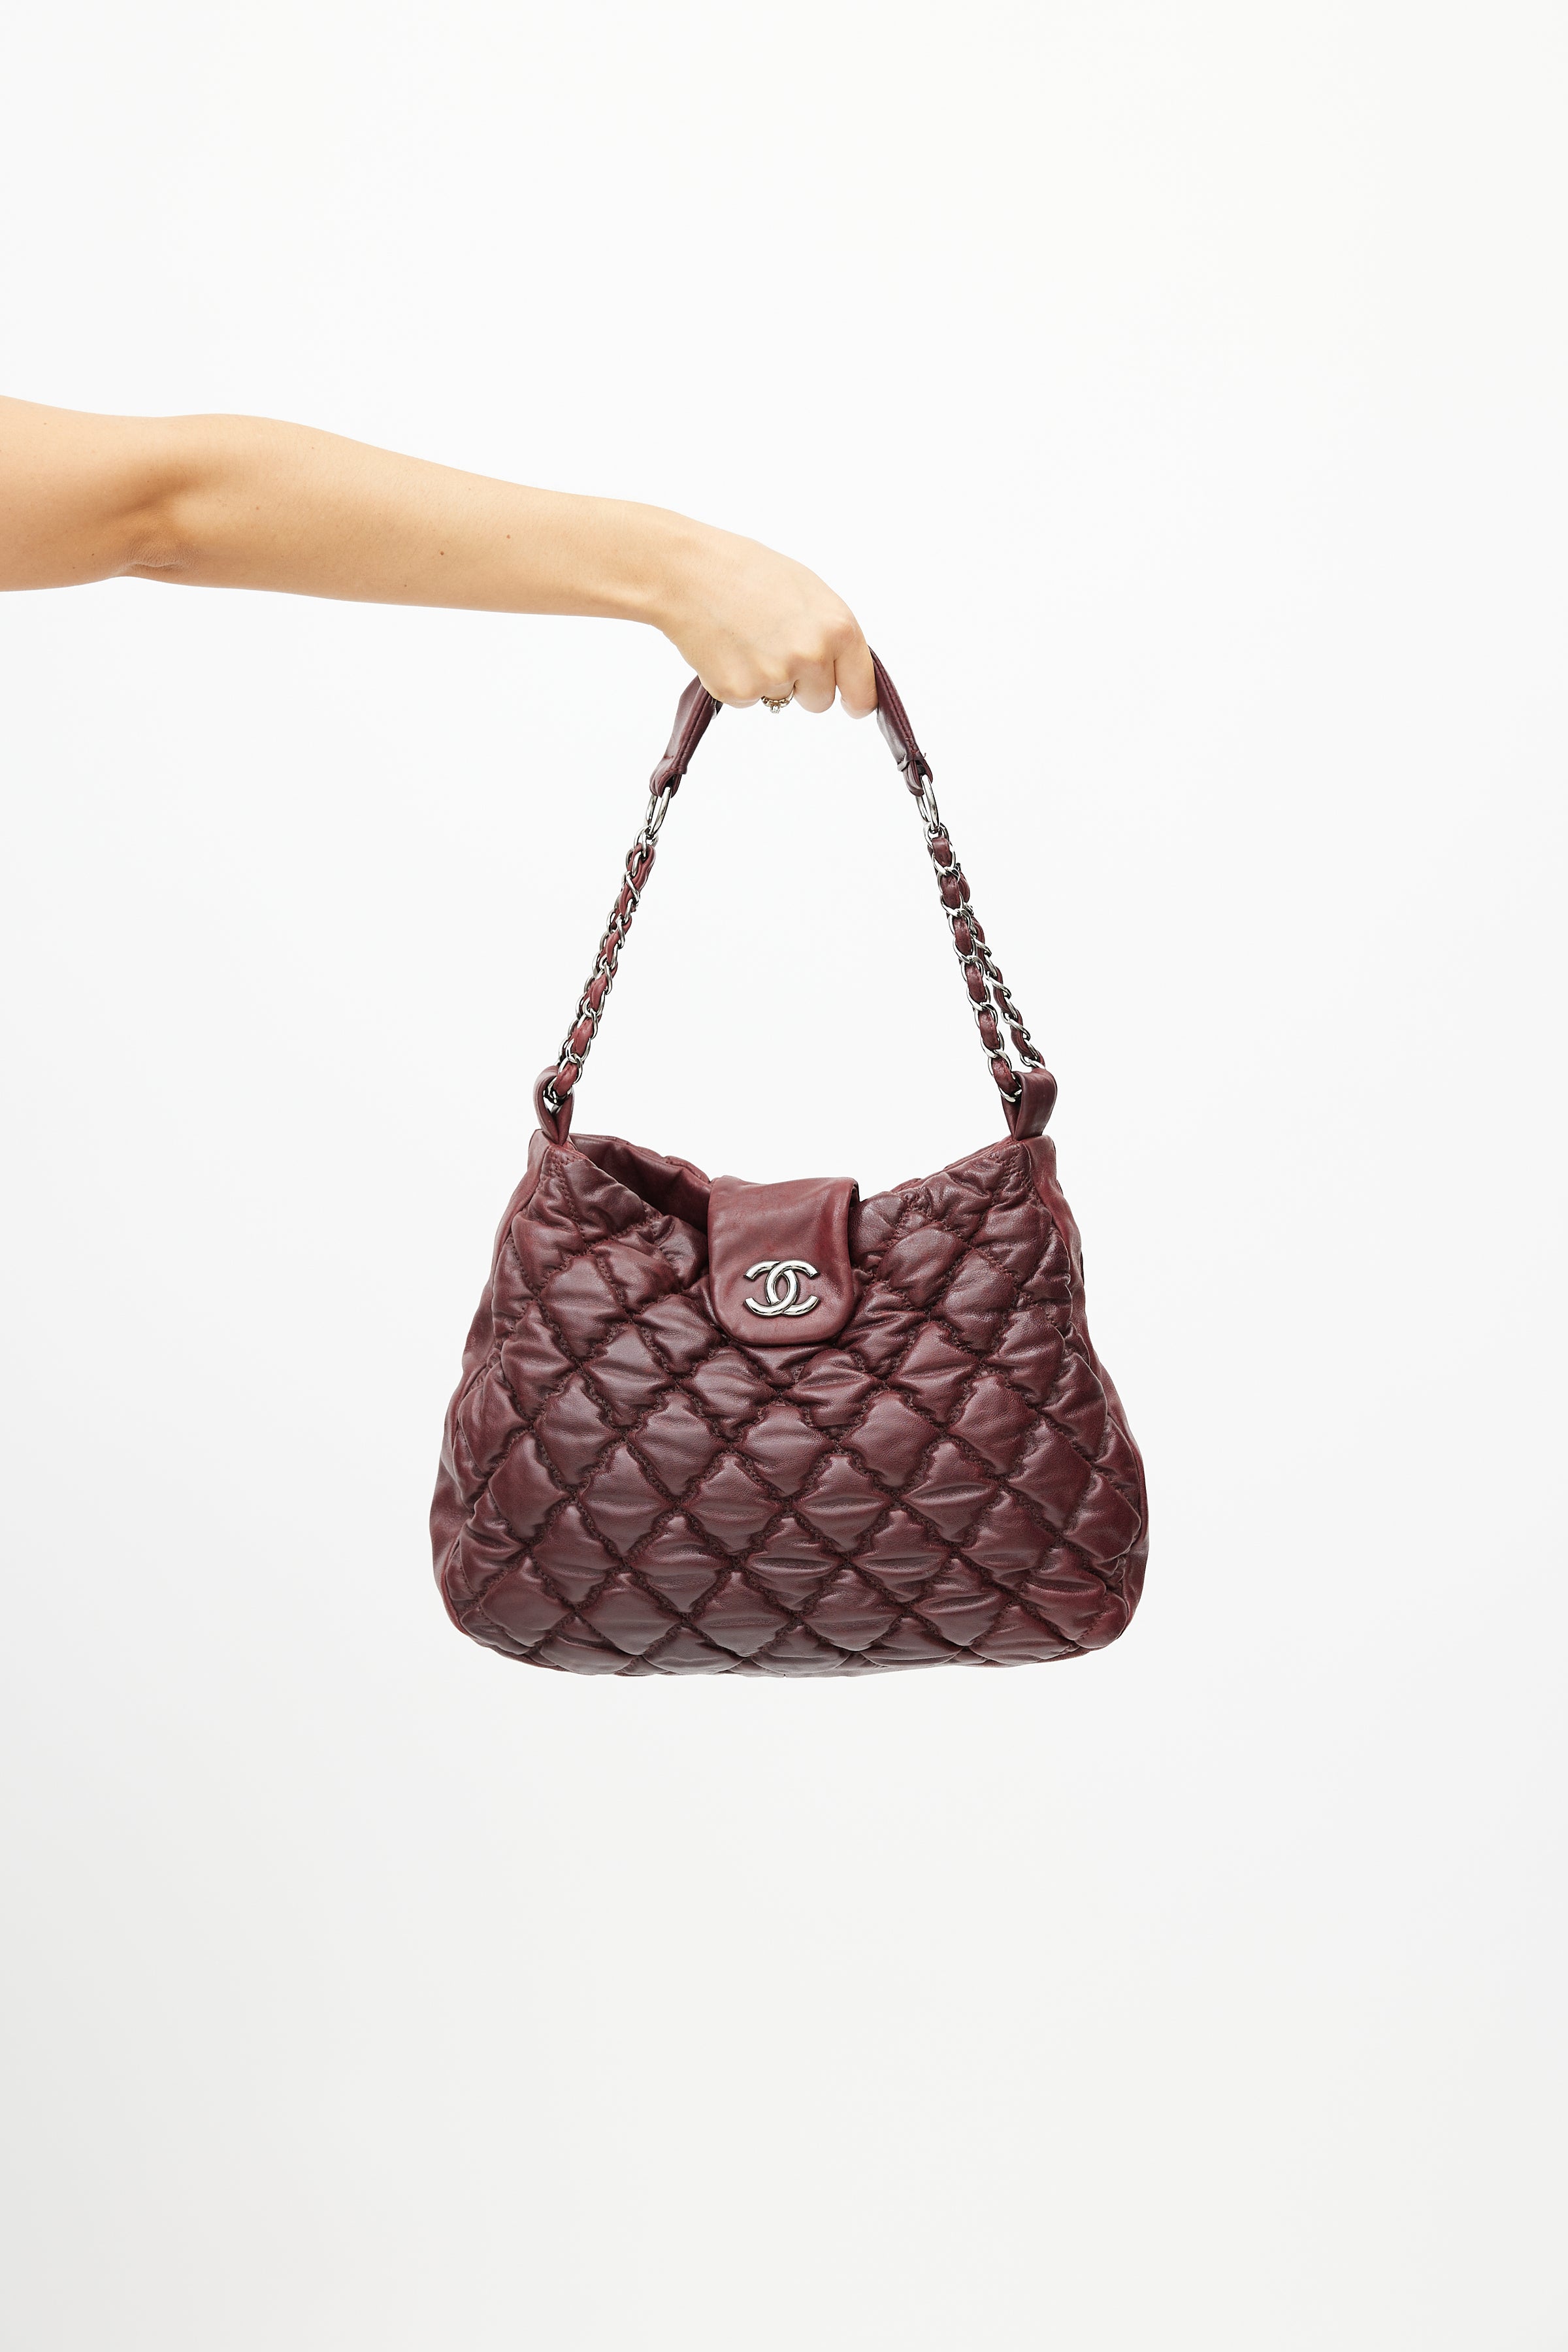 Chanel // 2008 Burgundy Quilted Leather Bubble Bag – VSP Consignment